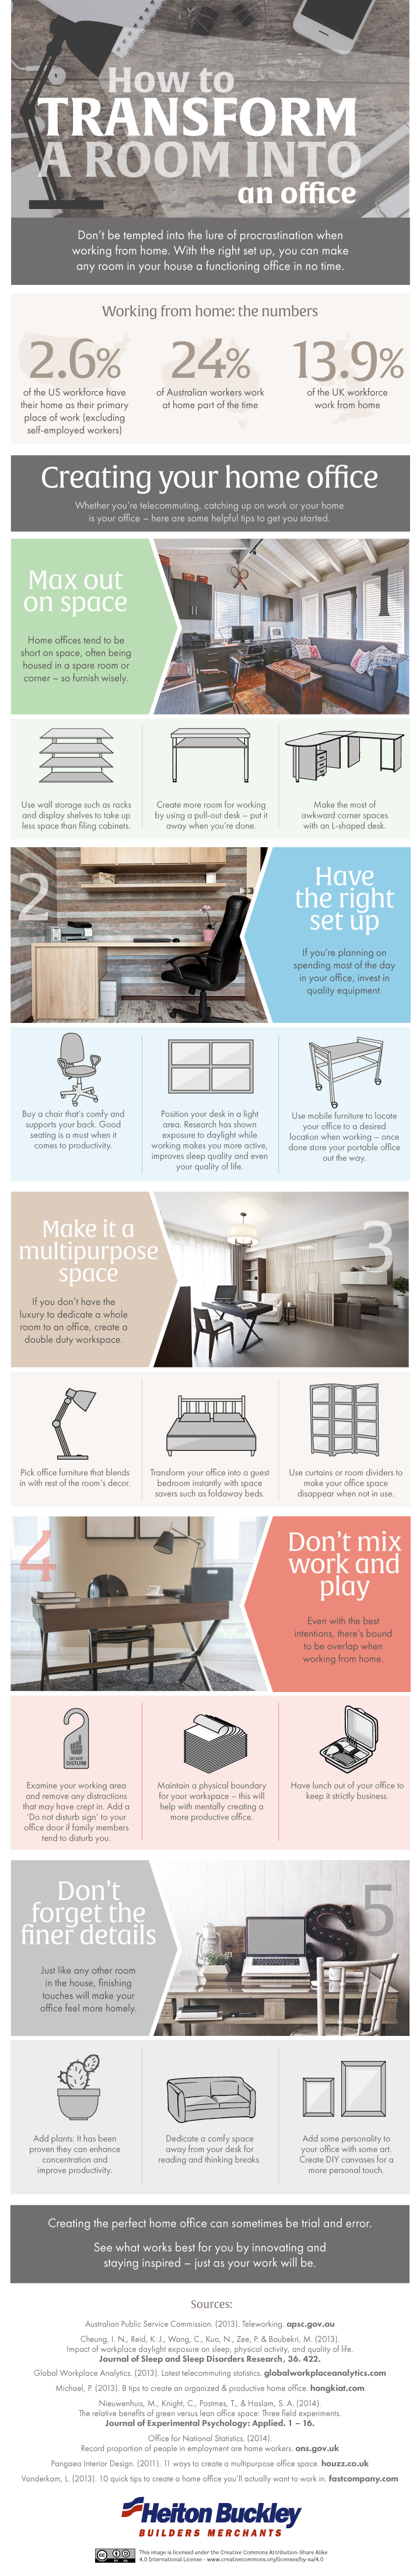 How To Transform A Room Into An Office